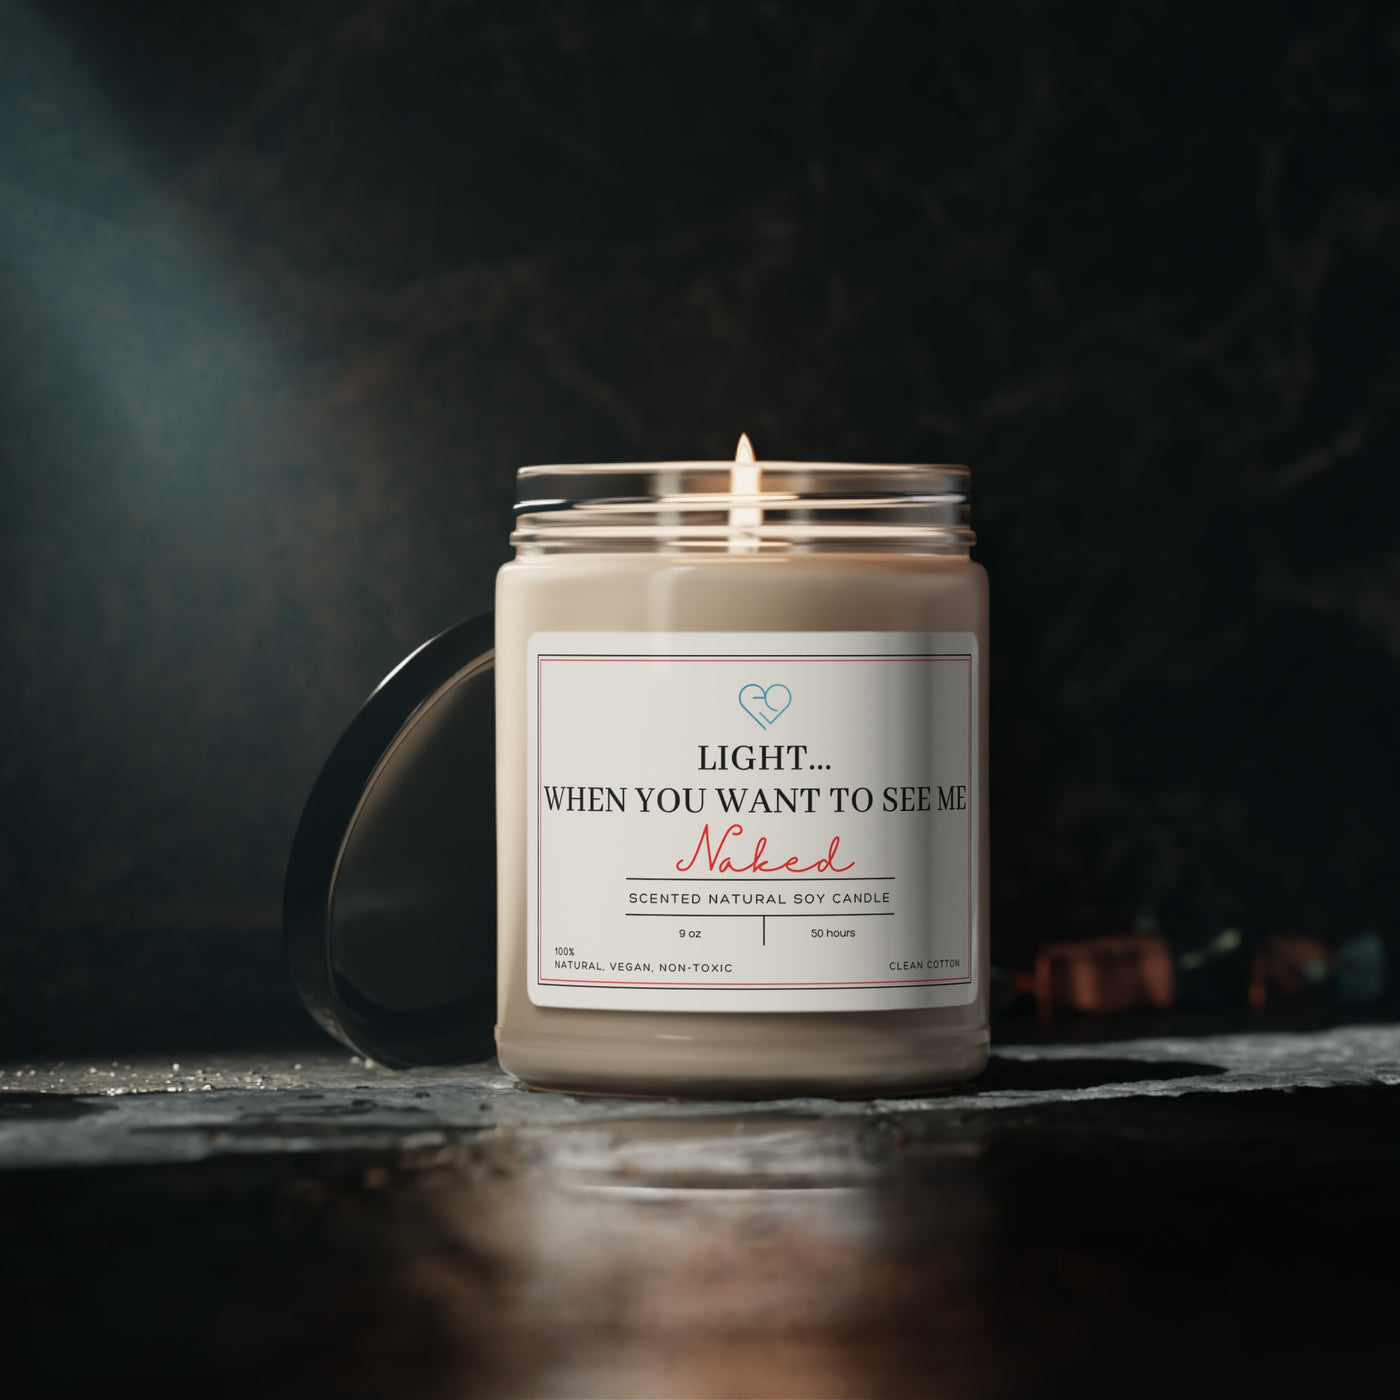 Light Me When You Want To See Me Naked Scented Soy Candle, Sexy Gift, Bedroom Play Scent